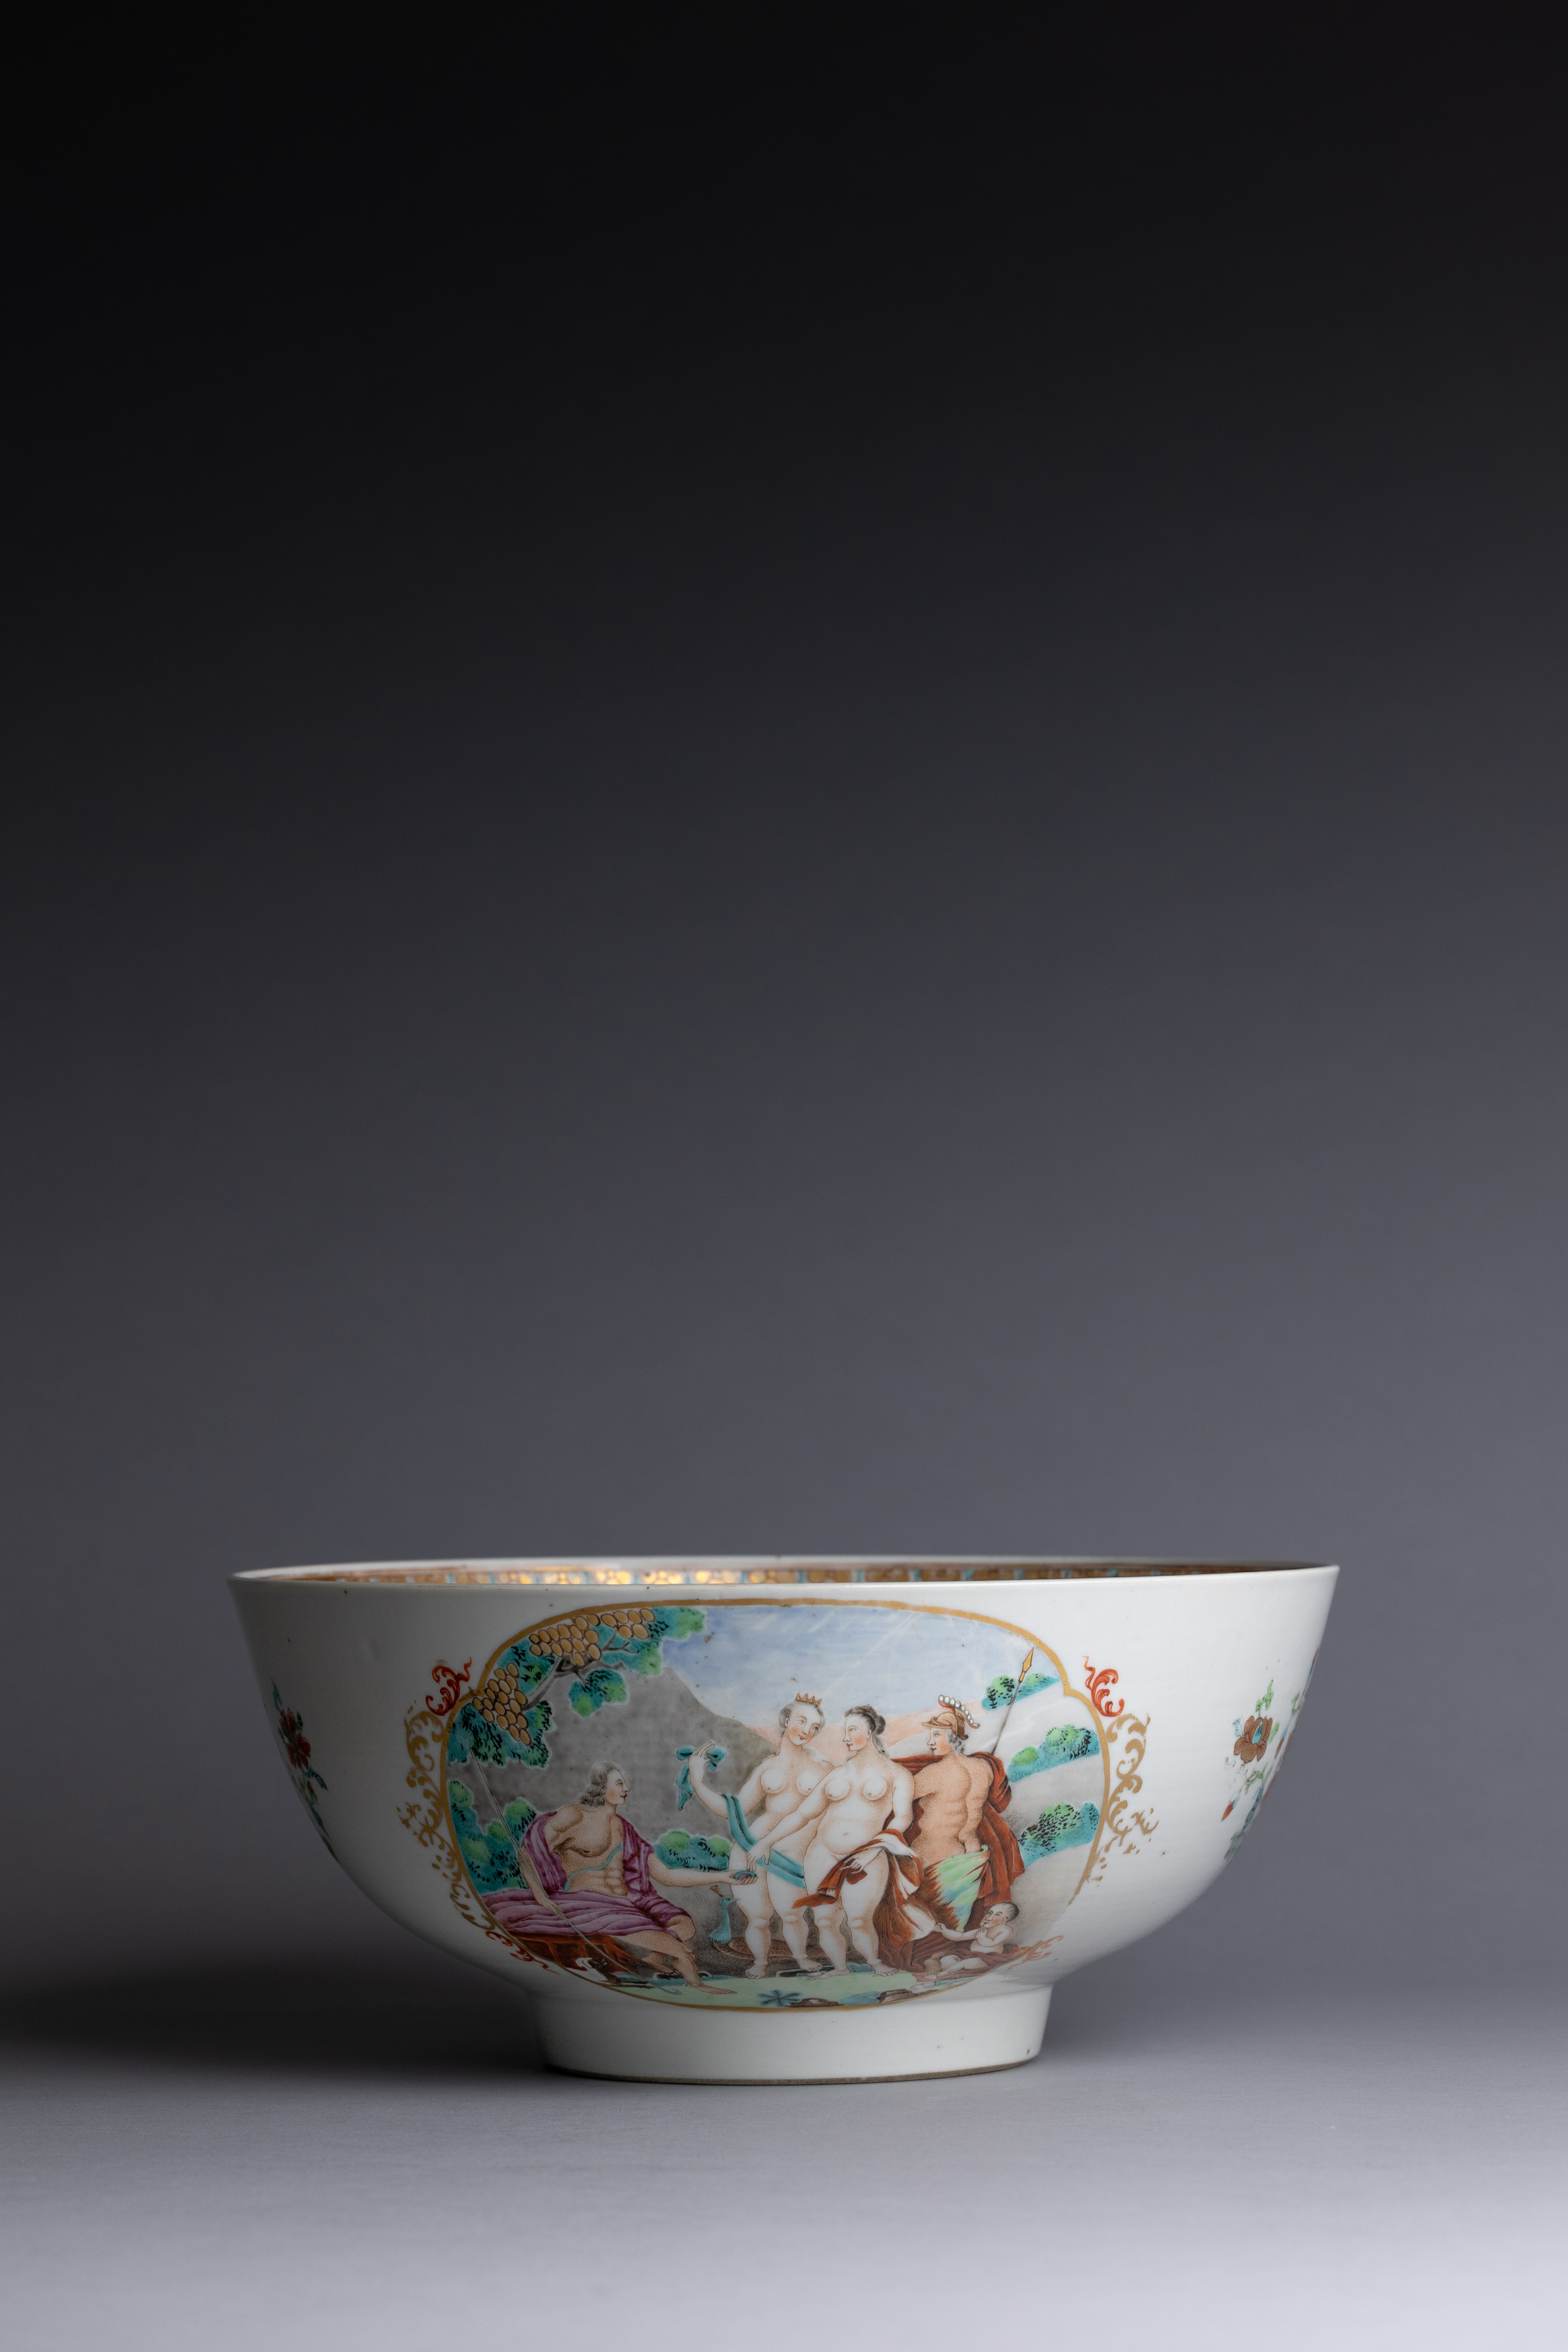 Chinese Export Punch Bowl